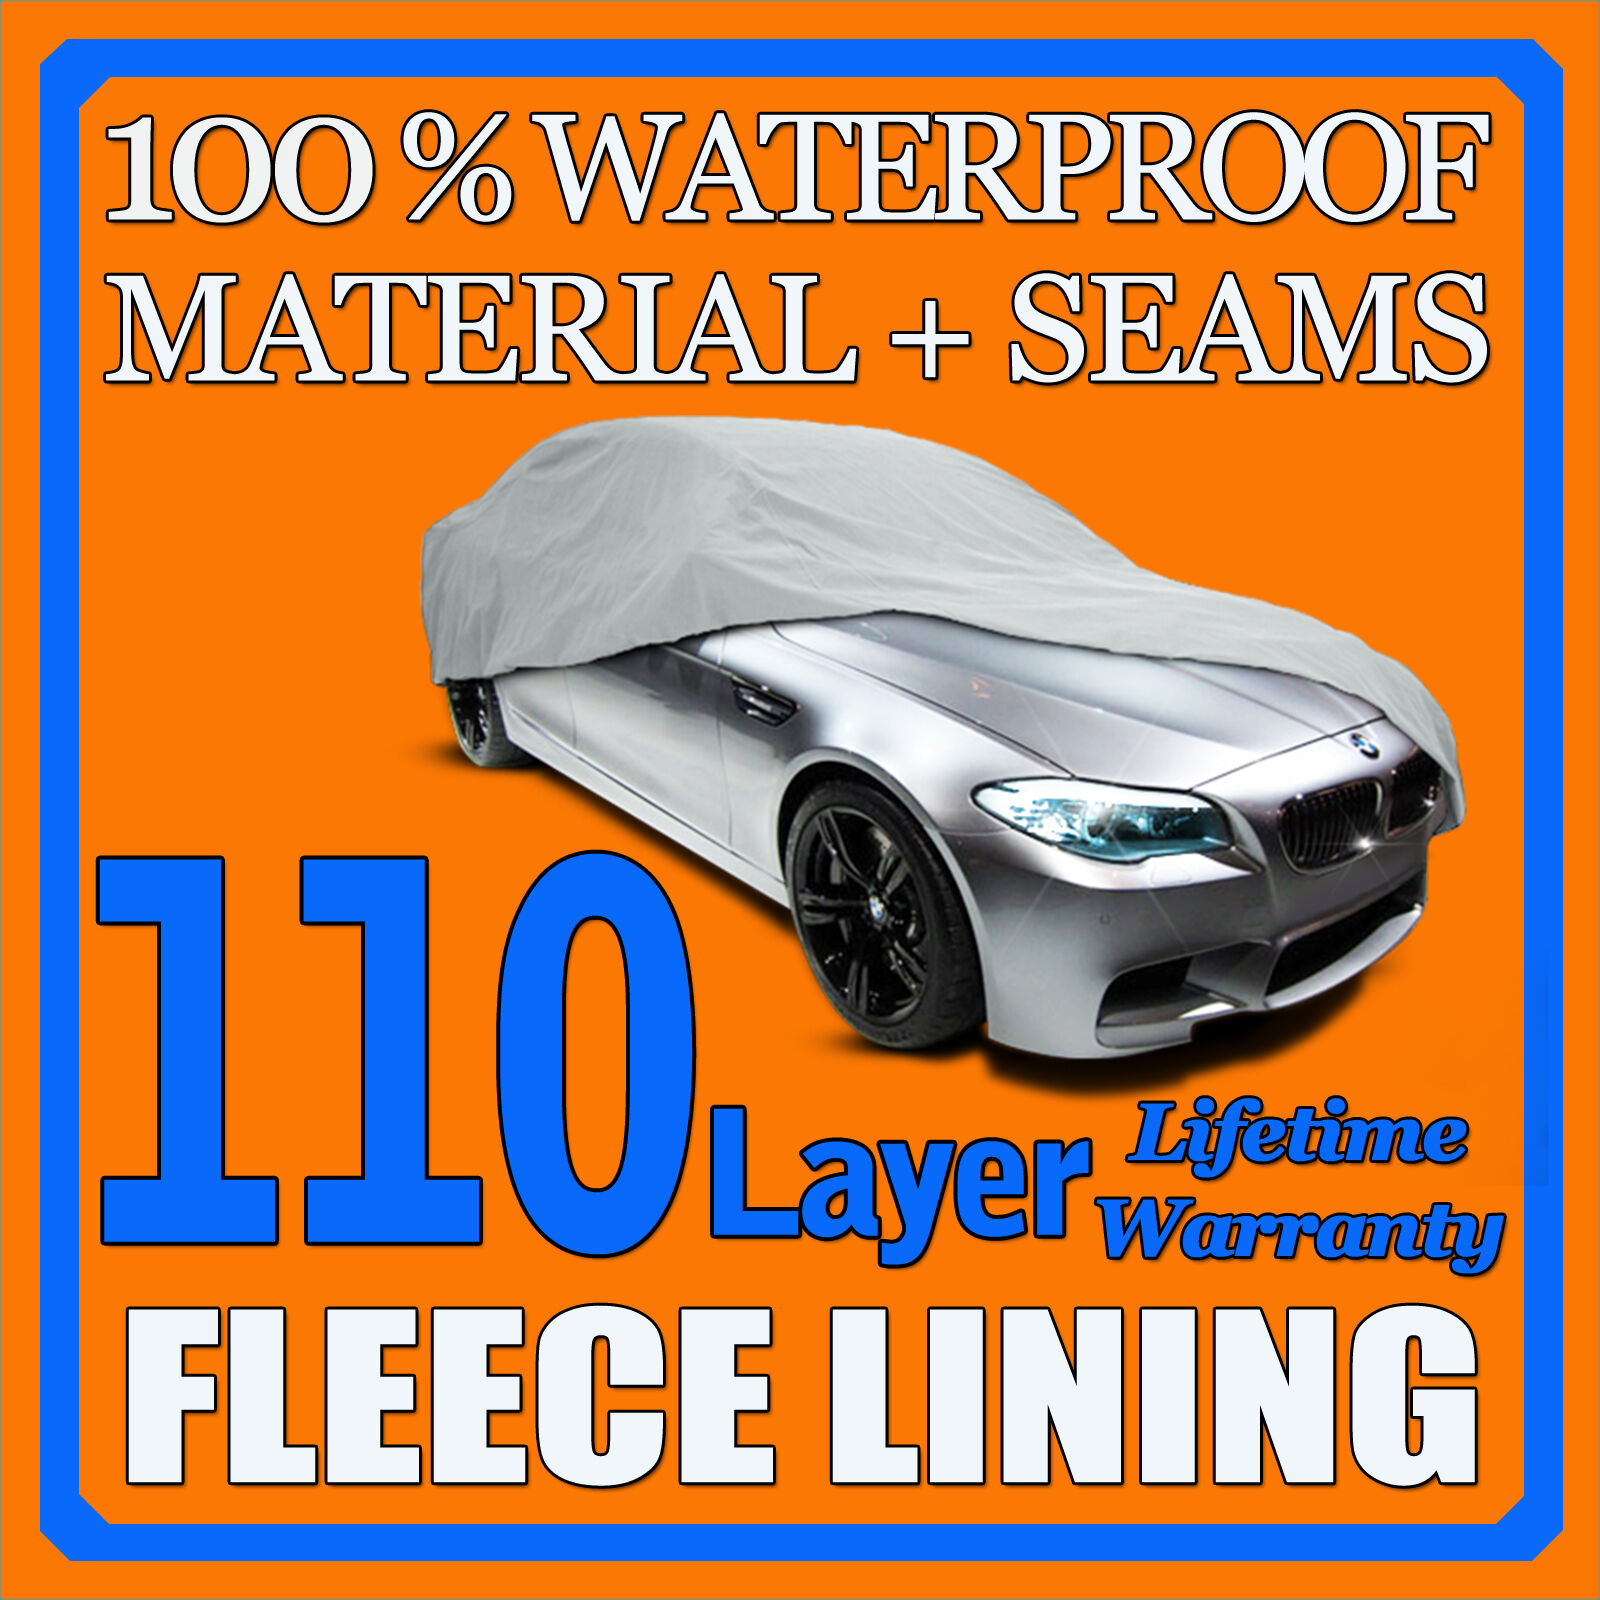 110 Layer Car Cover Outdoor Waterproof Scratchproof Breathable 60 70 80 90 100 F